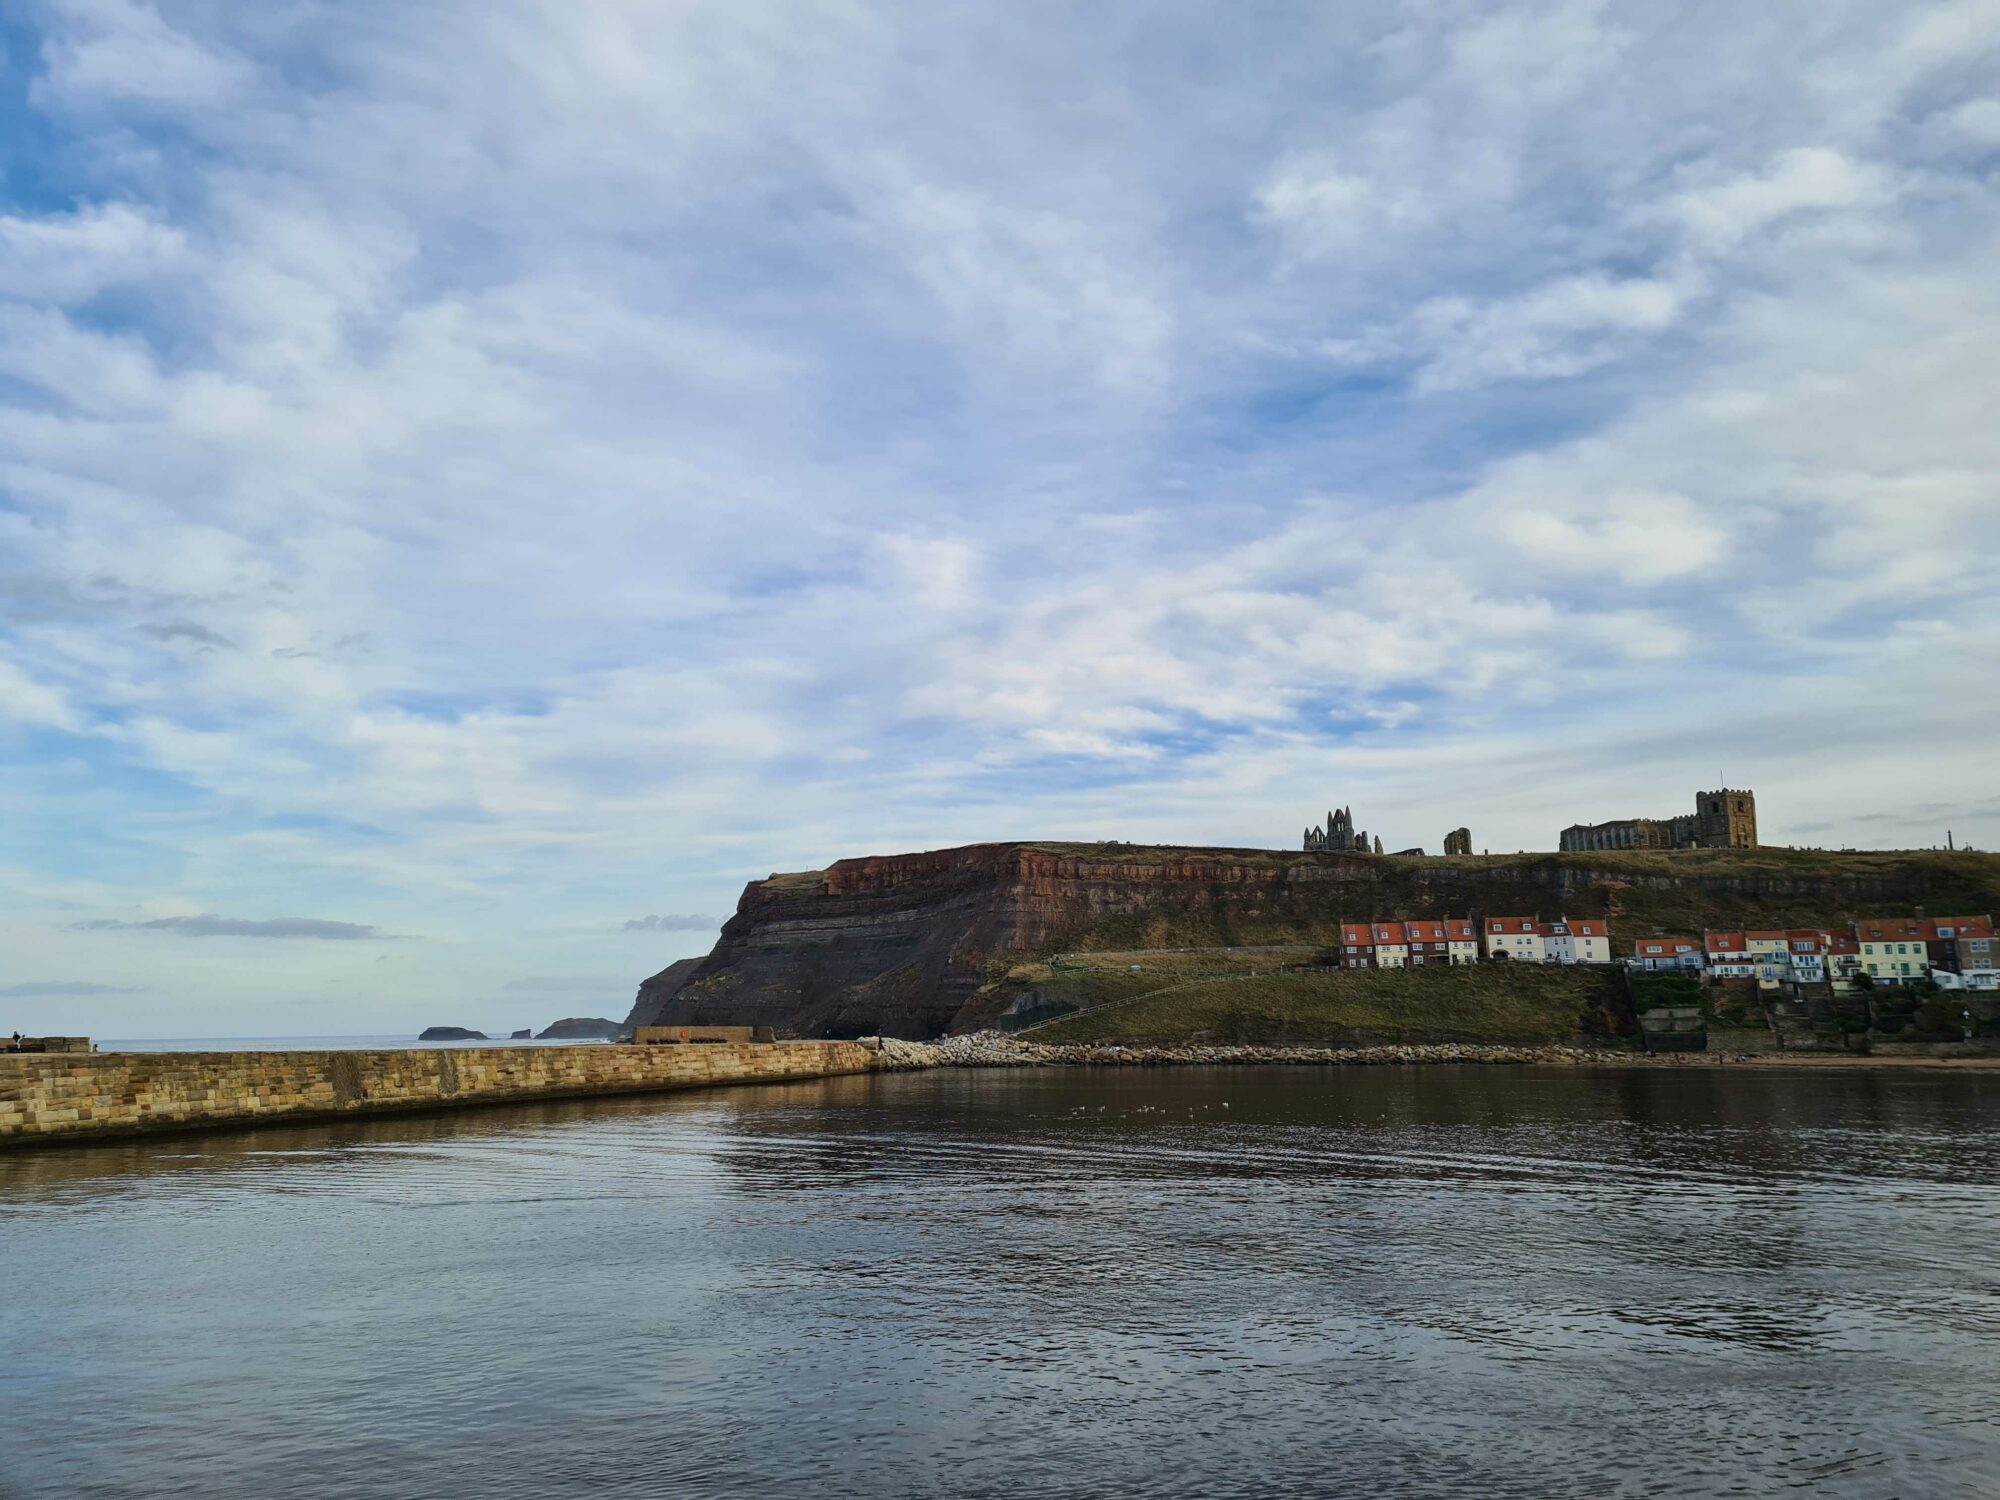 Image name whitby harbour and and cliffs calm sea copyright yorkshire com international ltd the 3 image from the post Looking Forward to Spring Bank Holiday in Yorkshire: Top Places to Visit and Where to Stay in Yorkshire.com.